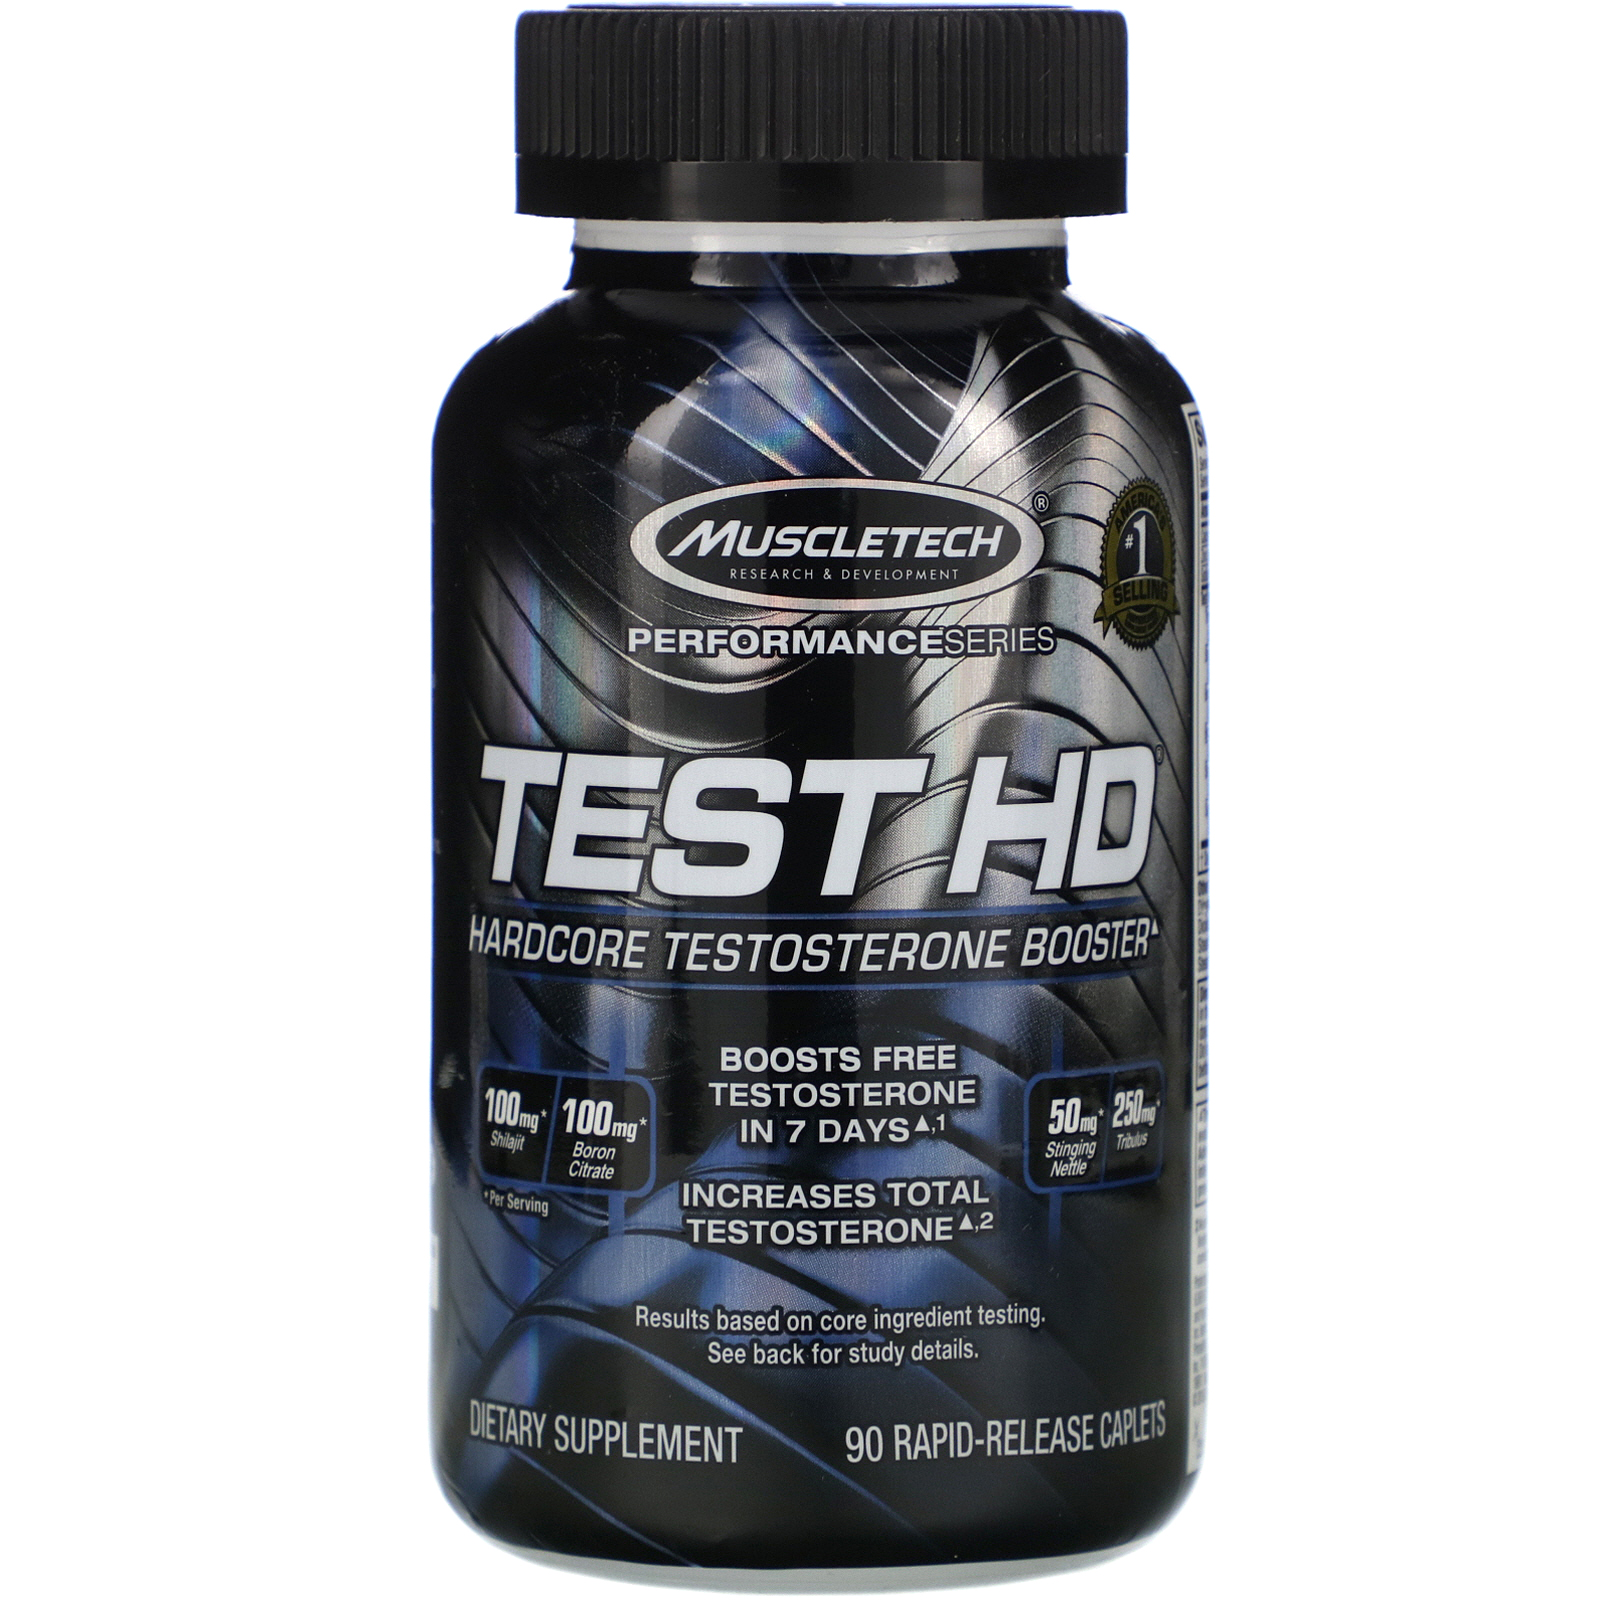 The testosterone booster is available at the best price